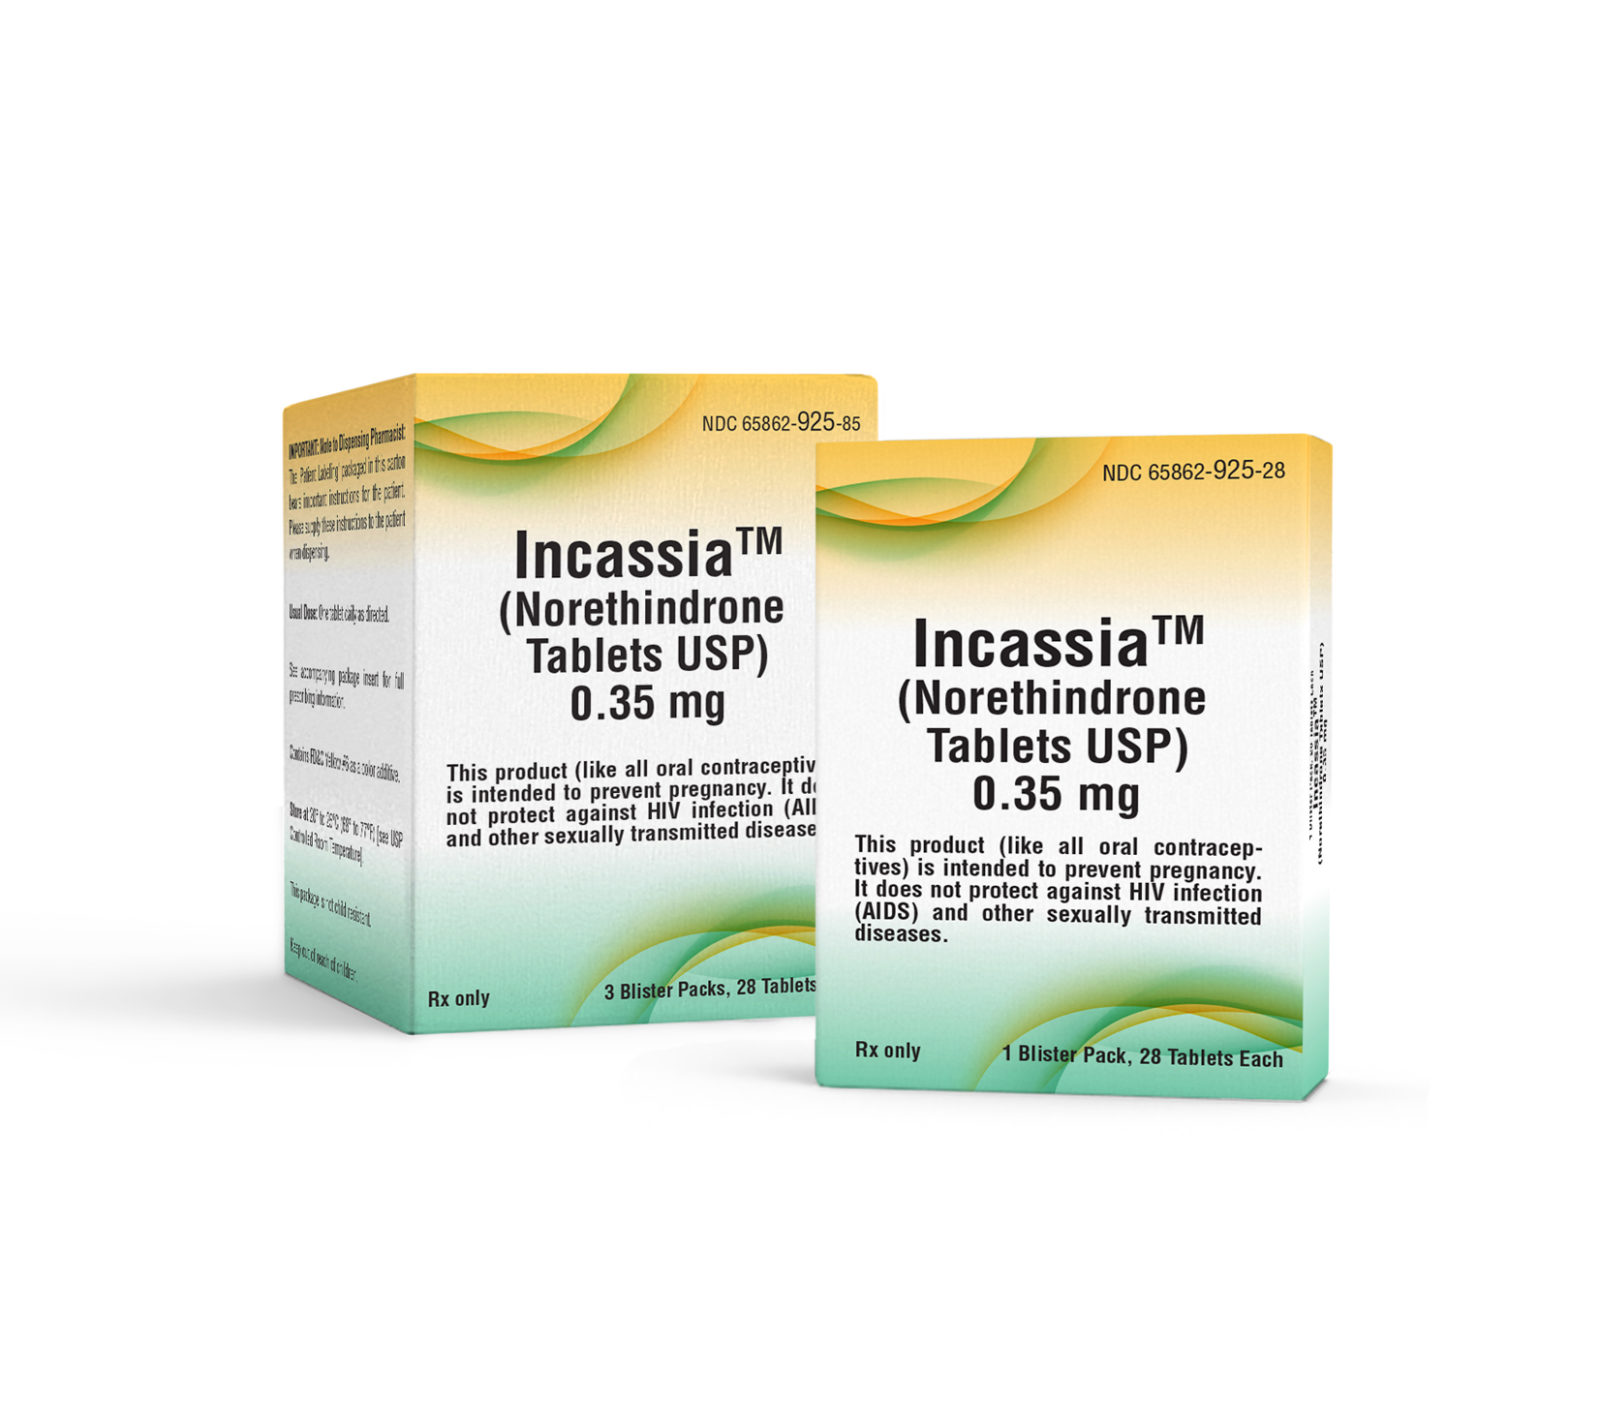 Incassia™ (Norethindrone Tabs) 0.35mg